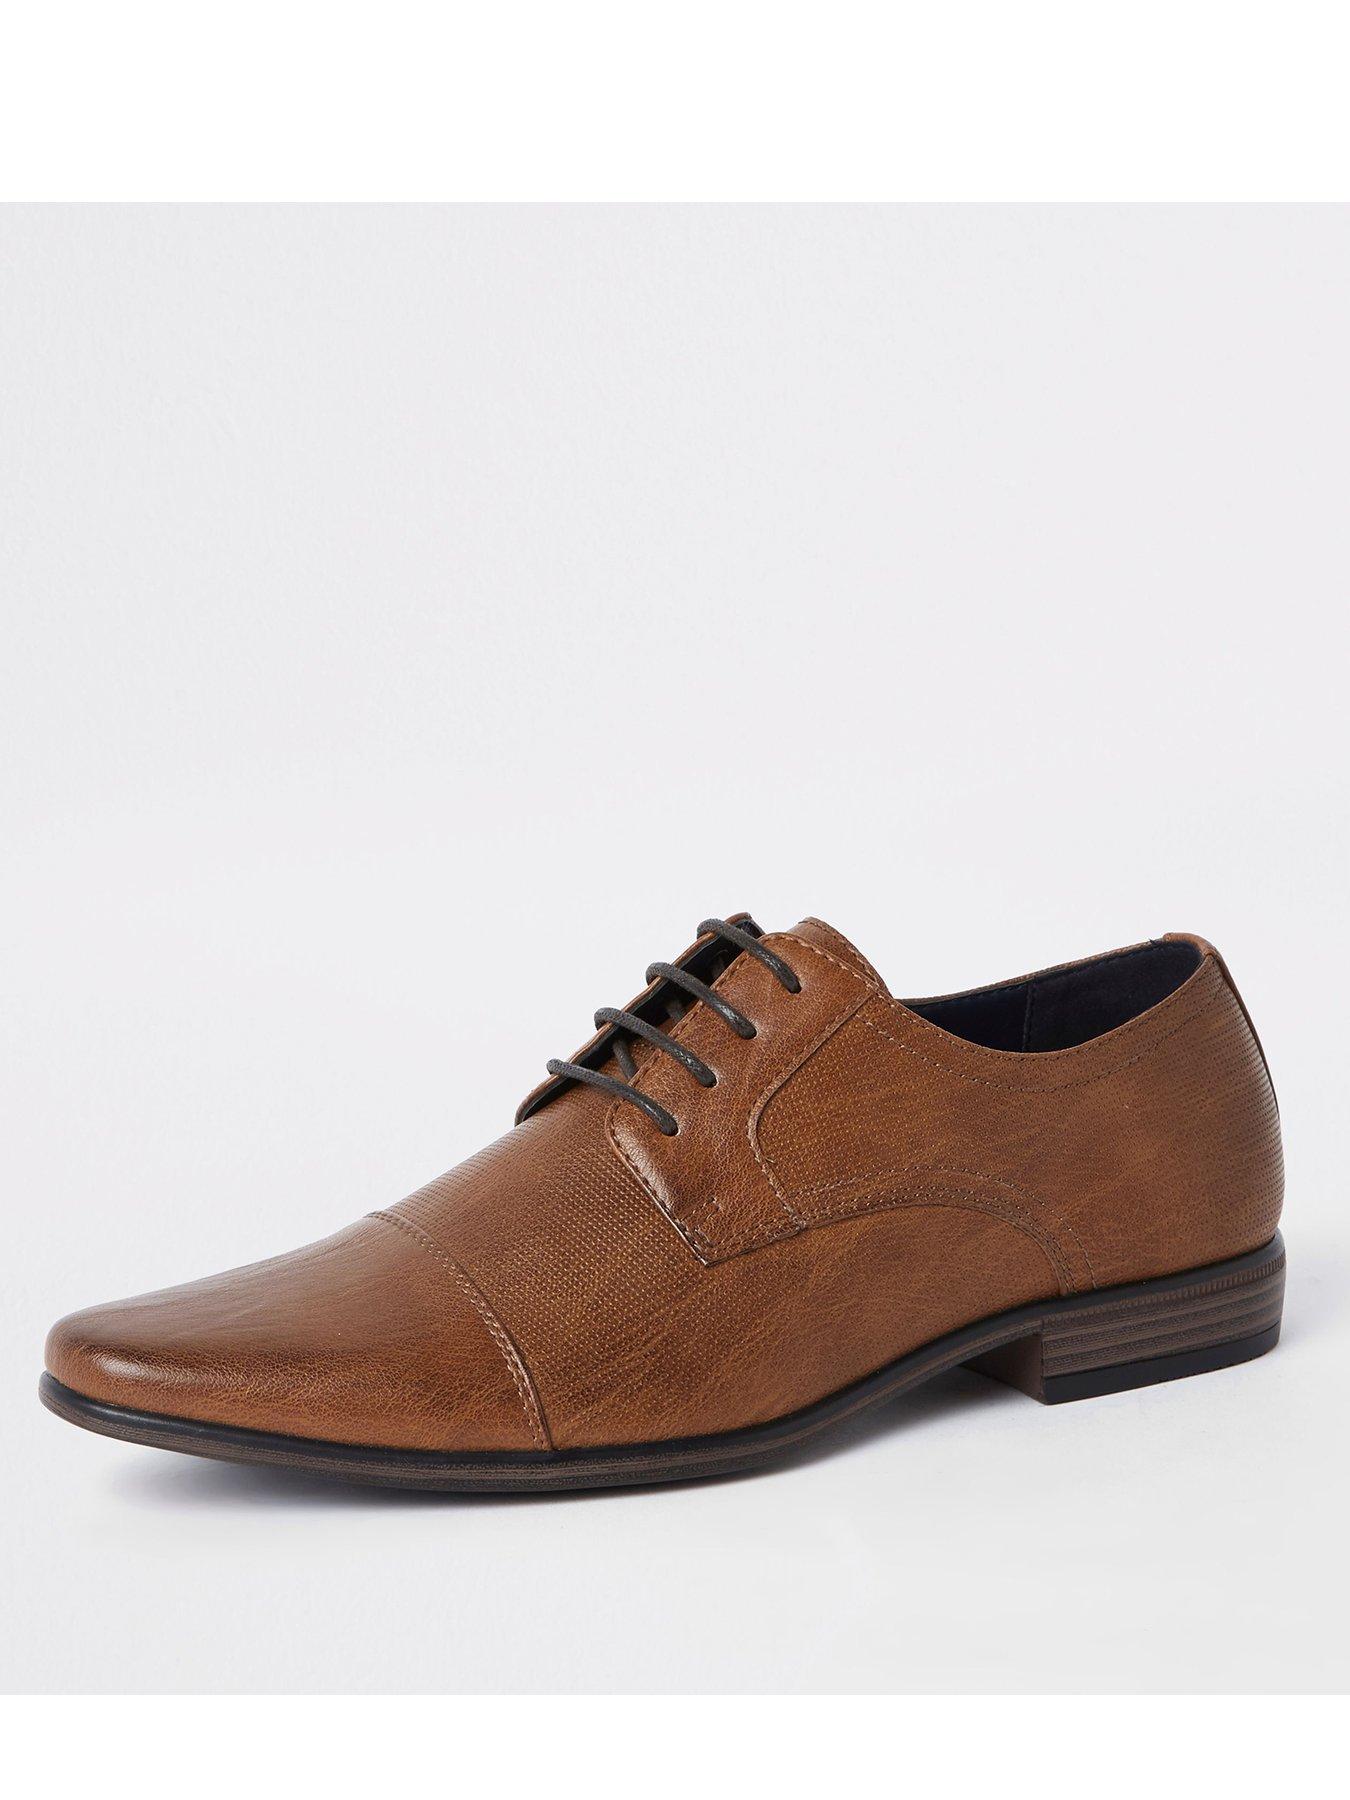 Homme Clarks Lair Cap FORMAL LACE UP chaussures